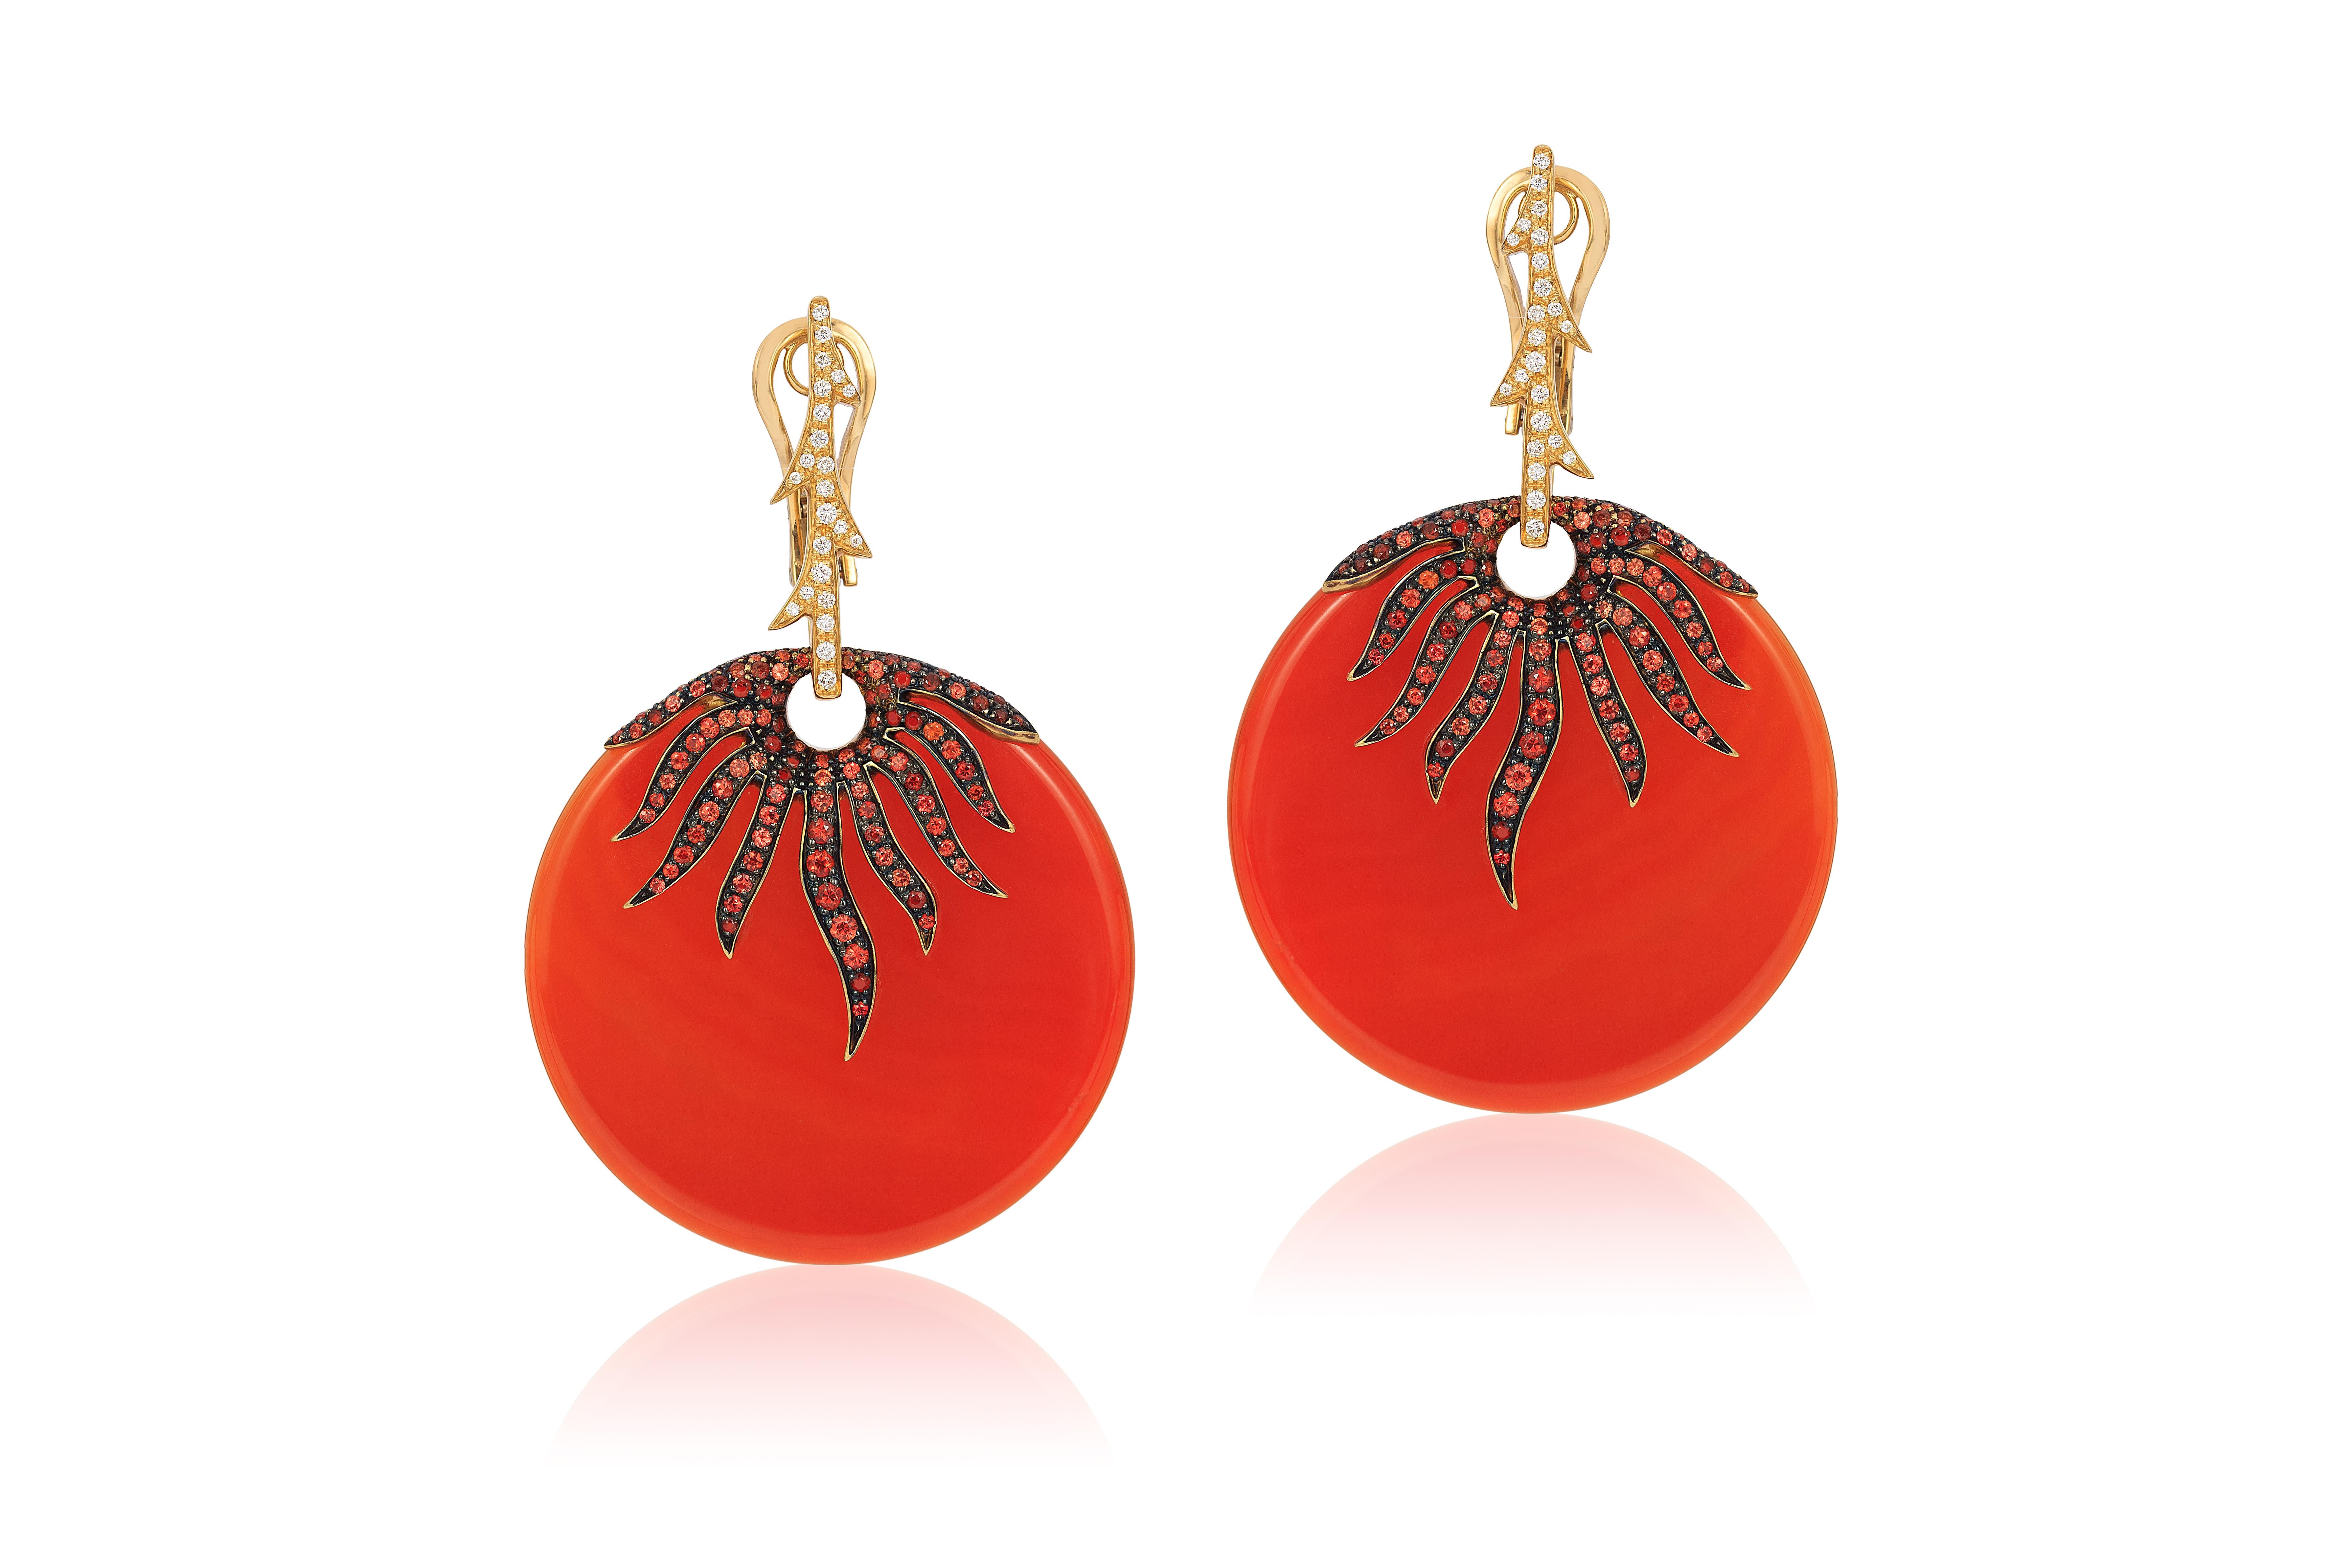 Andreoli Orange Sapphire Carnelian Diamond Earrings 18 Karat Rose Gold. These earrings feature two round carnelian stones with 3.46 carats of round brilliant orange sapphires with blackened oxidized rhodium to create an impact. 0.47 carats of F-G-H